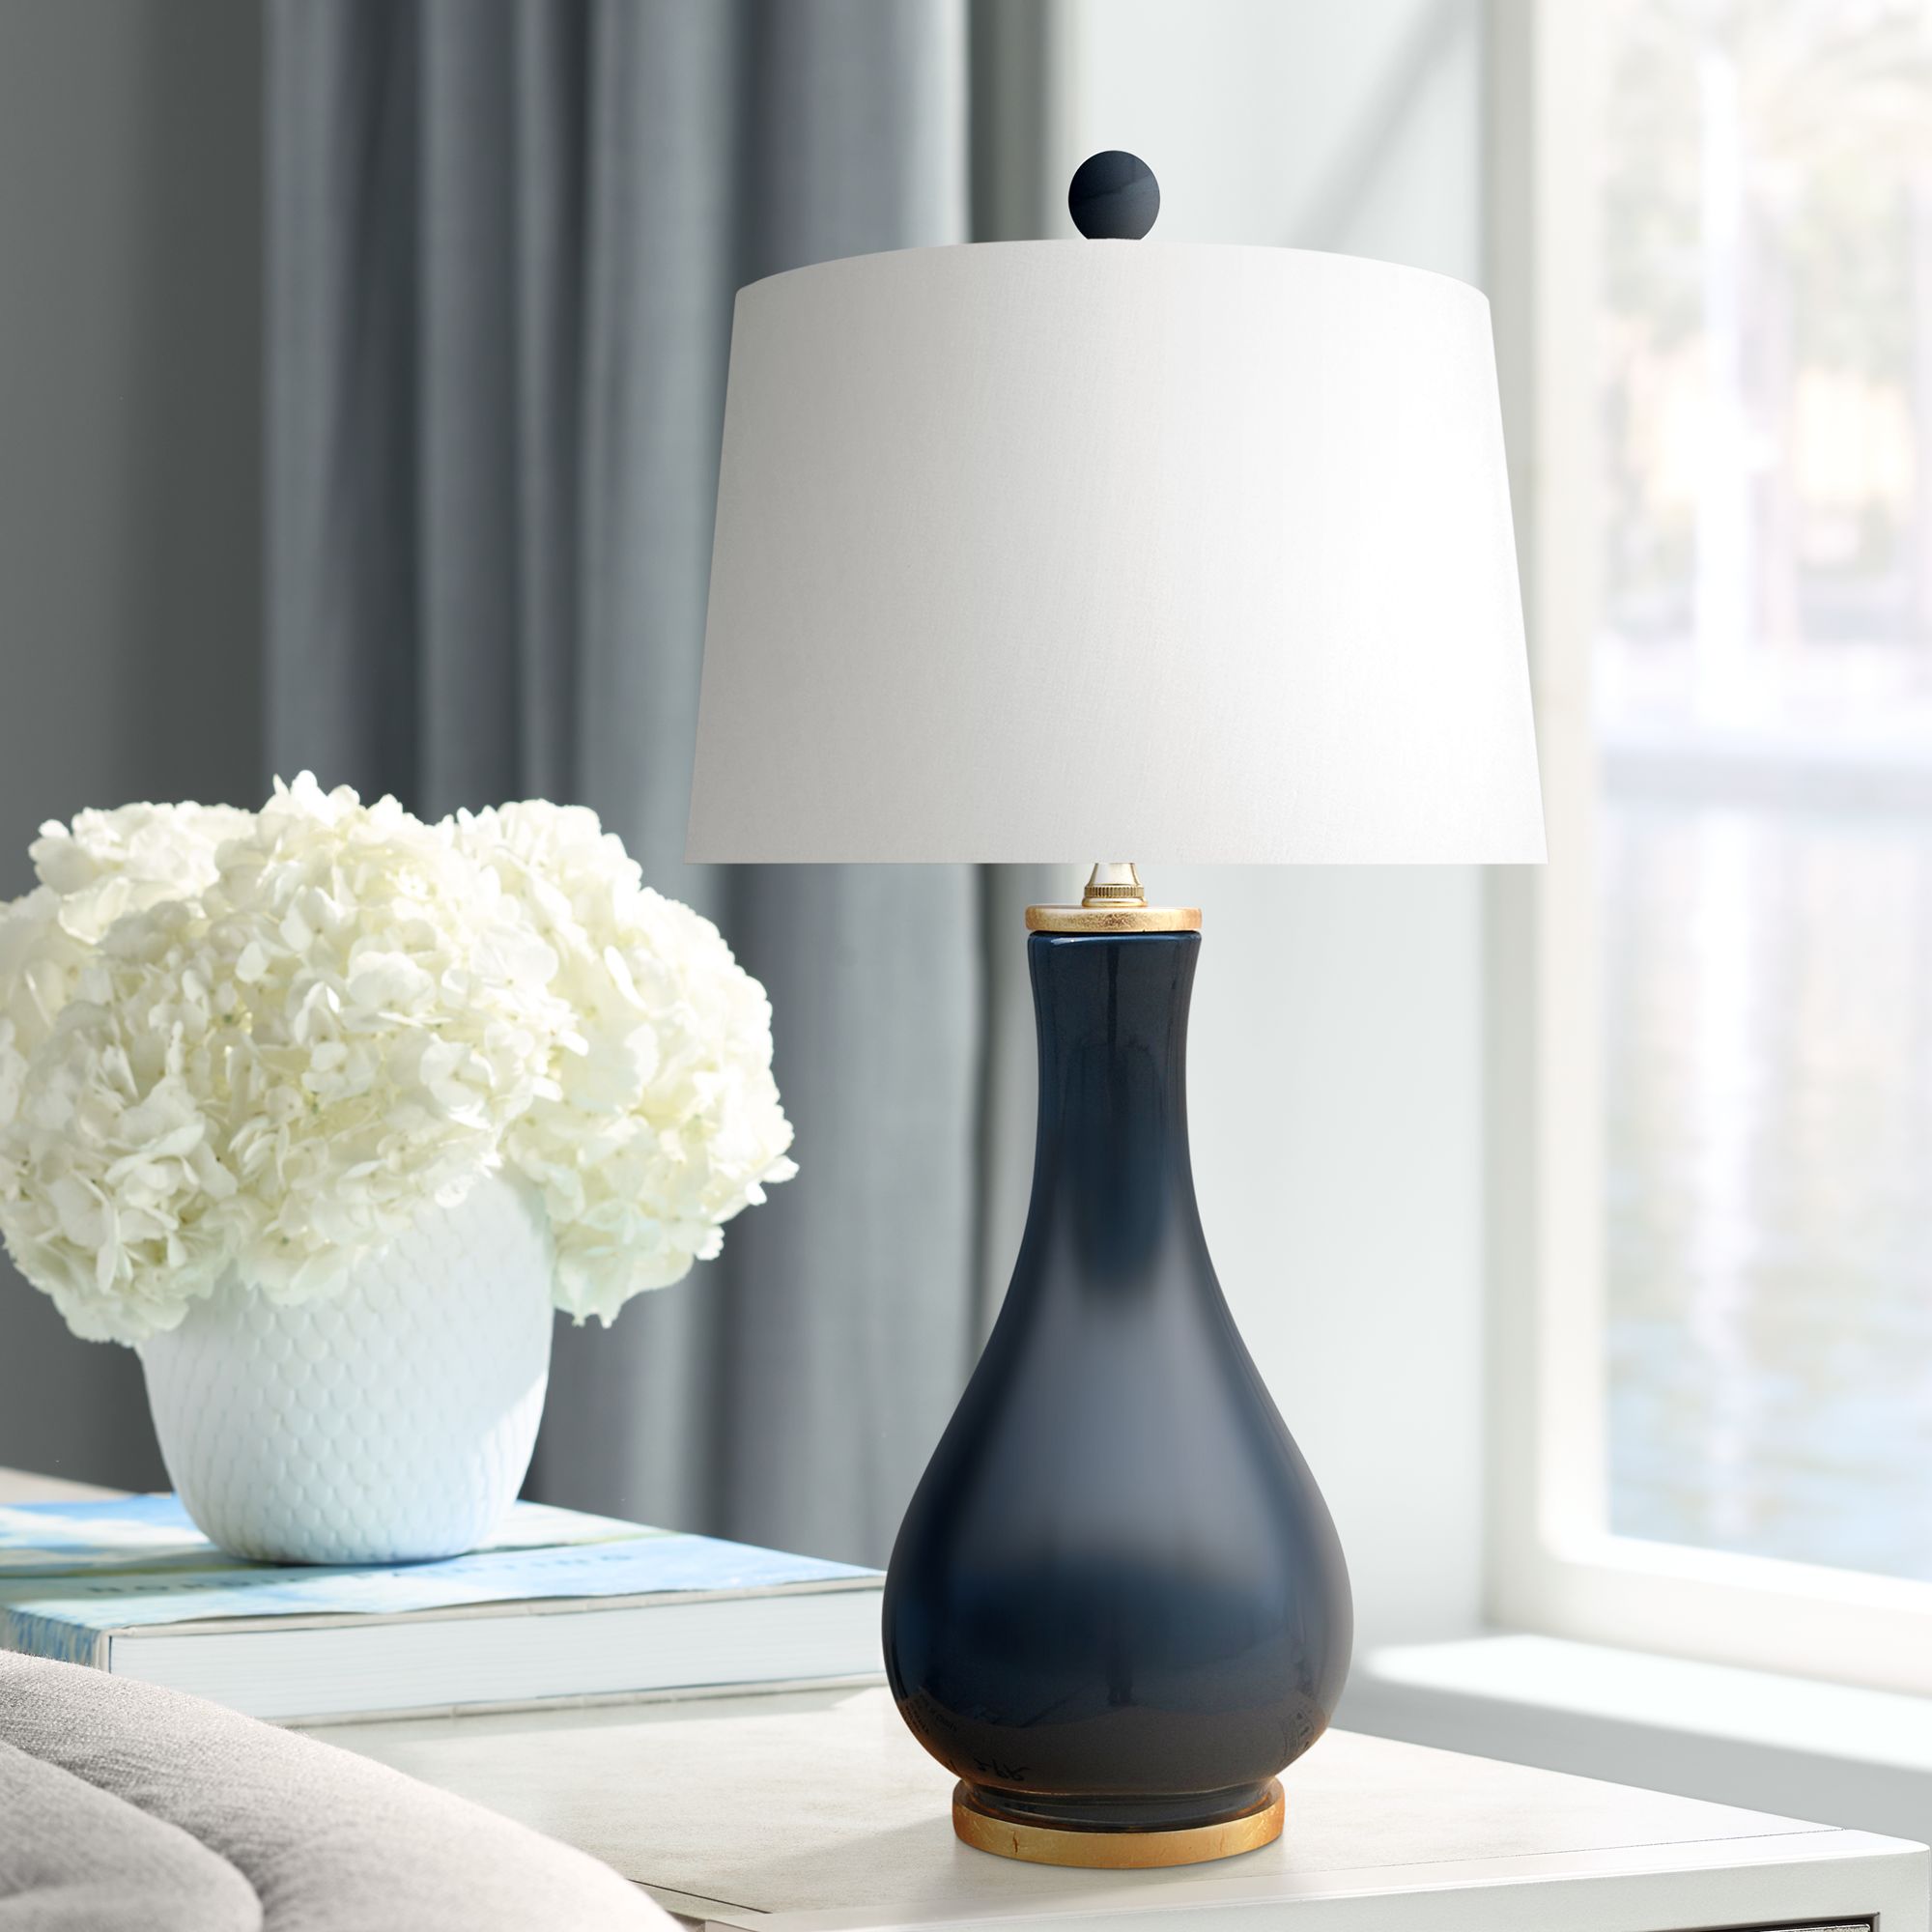 navy blue table lamps